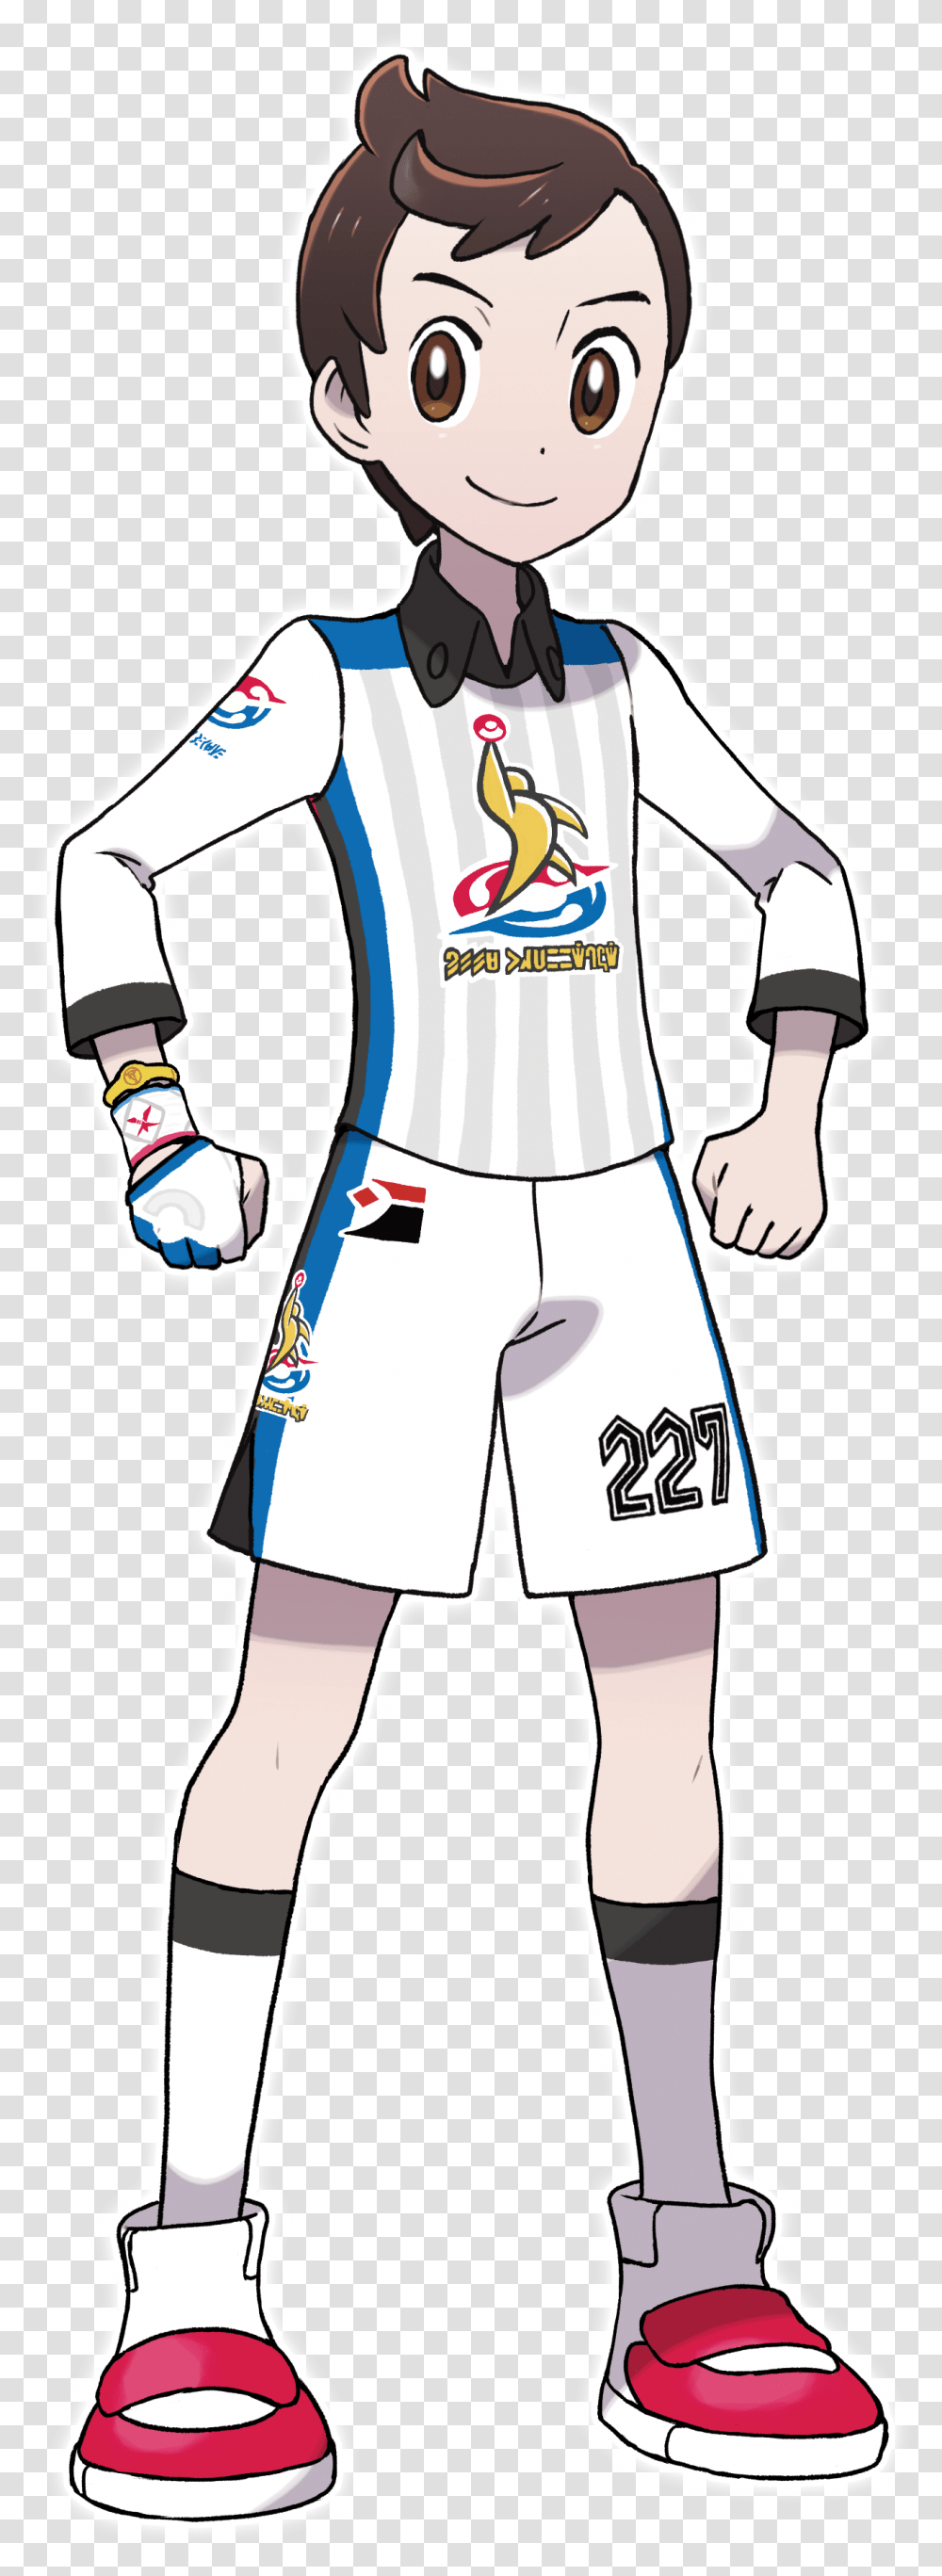 Image Victor Pokemon Sword And Shield, Person, Human, Astronaut Transparent Png